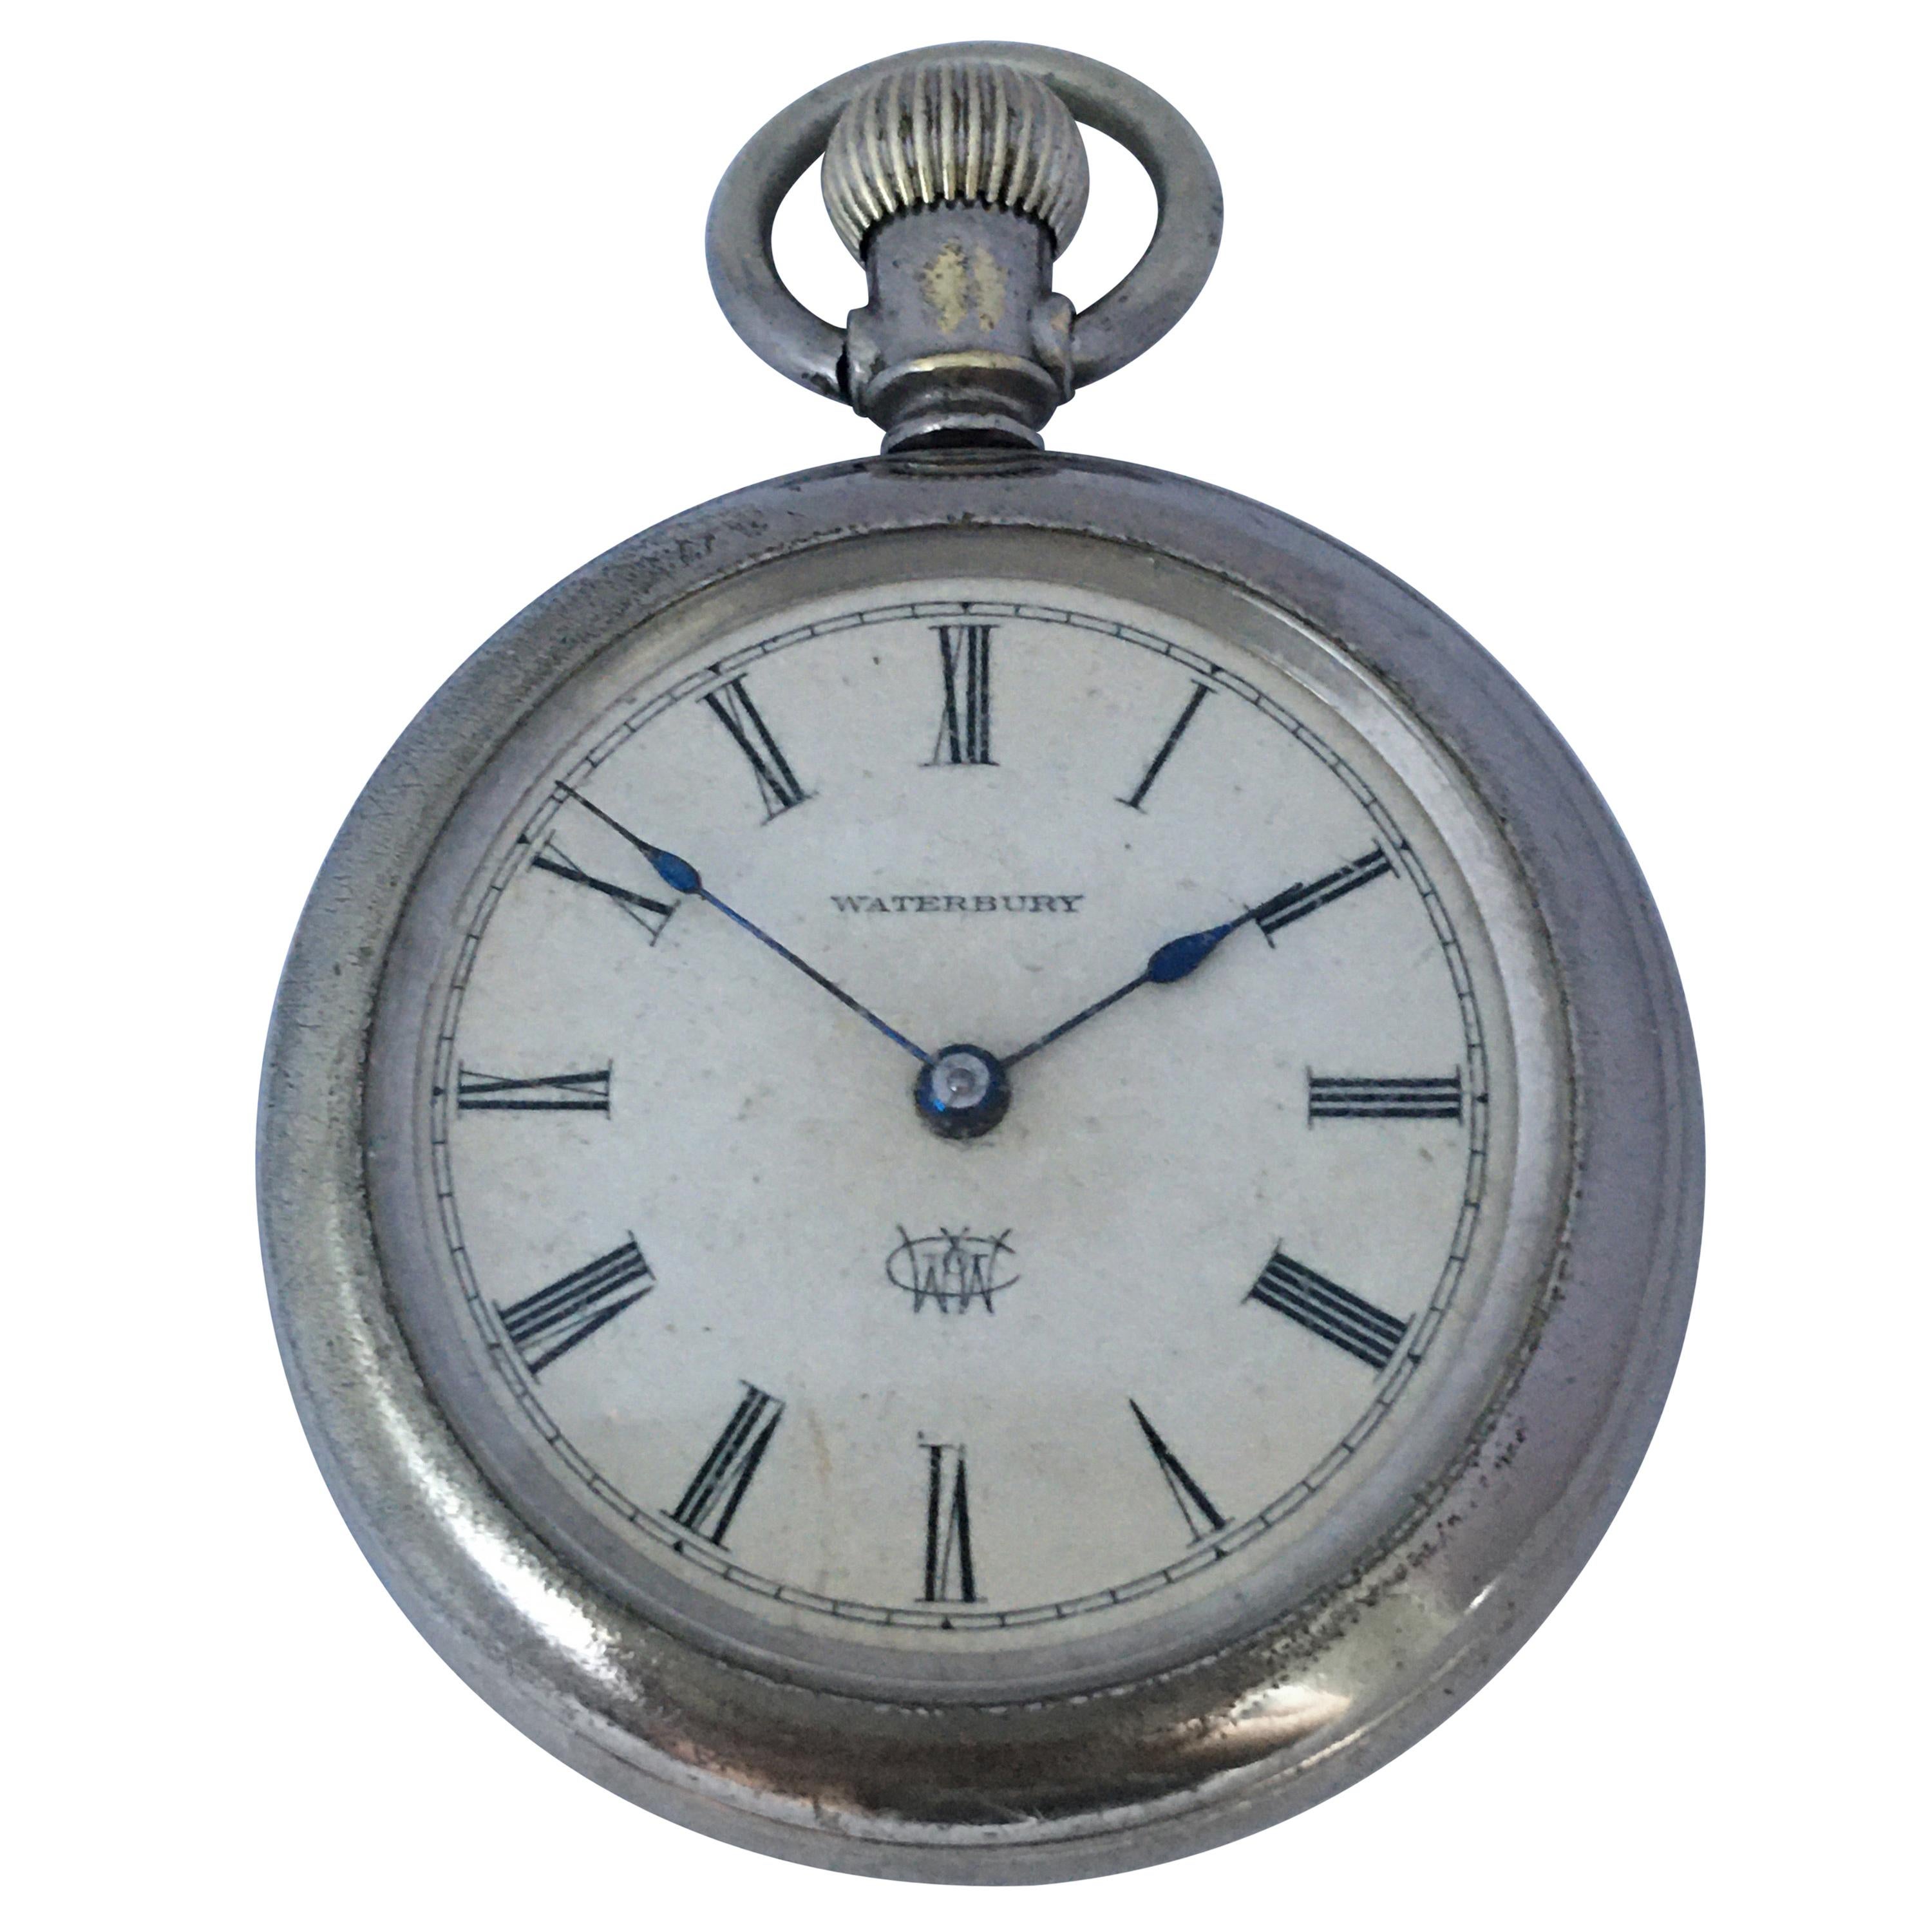 The Waterbury Watch Co. Antique Hand-Winding Pocket Watch For Sale